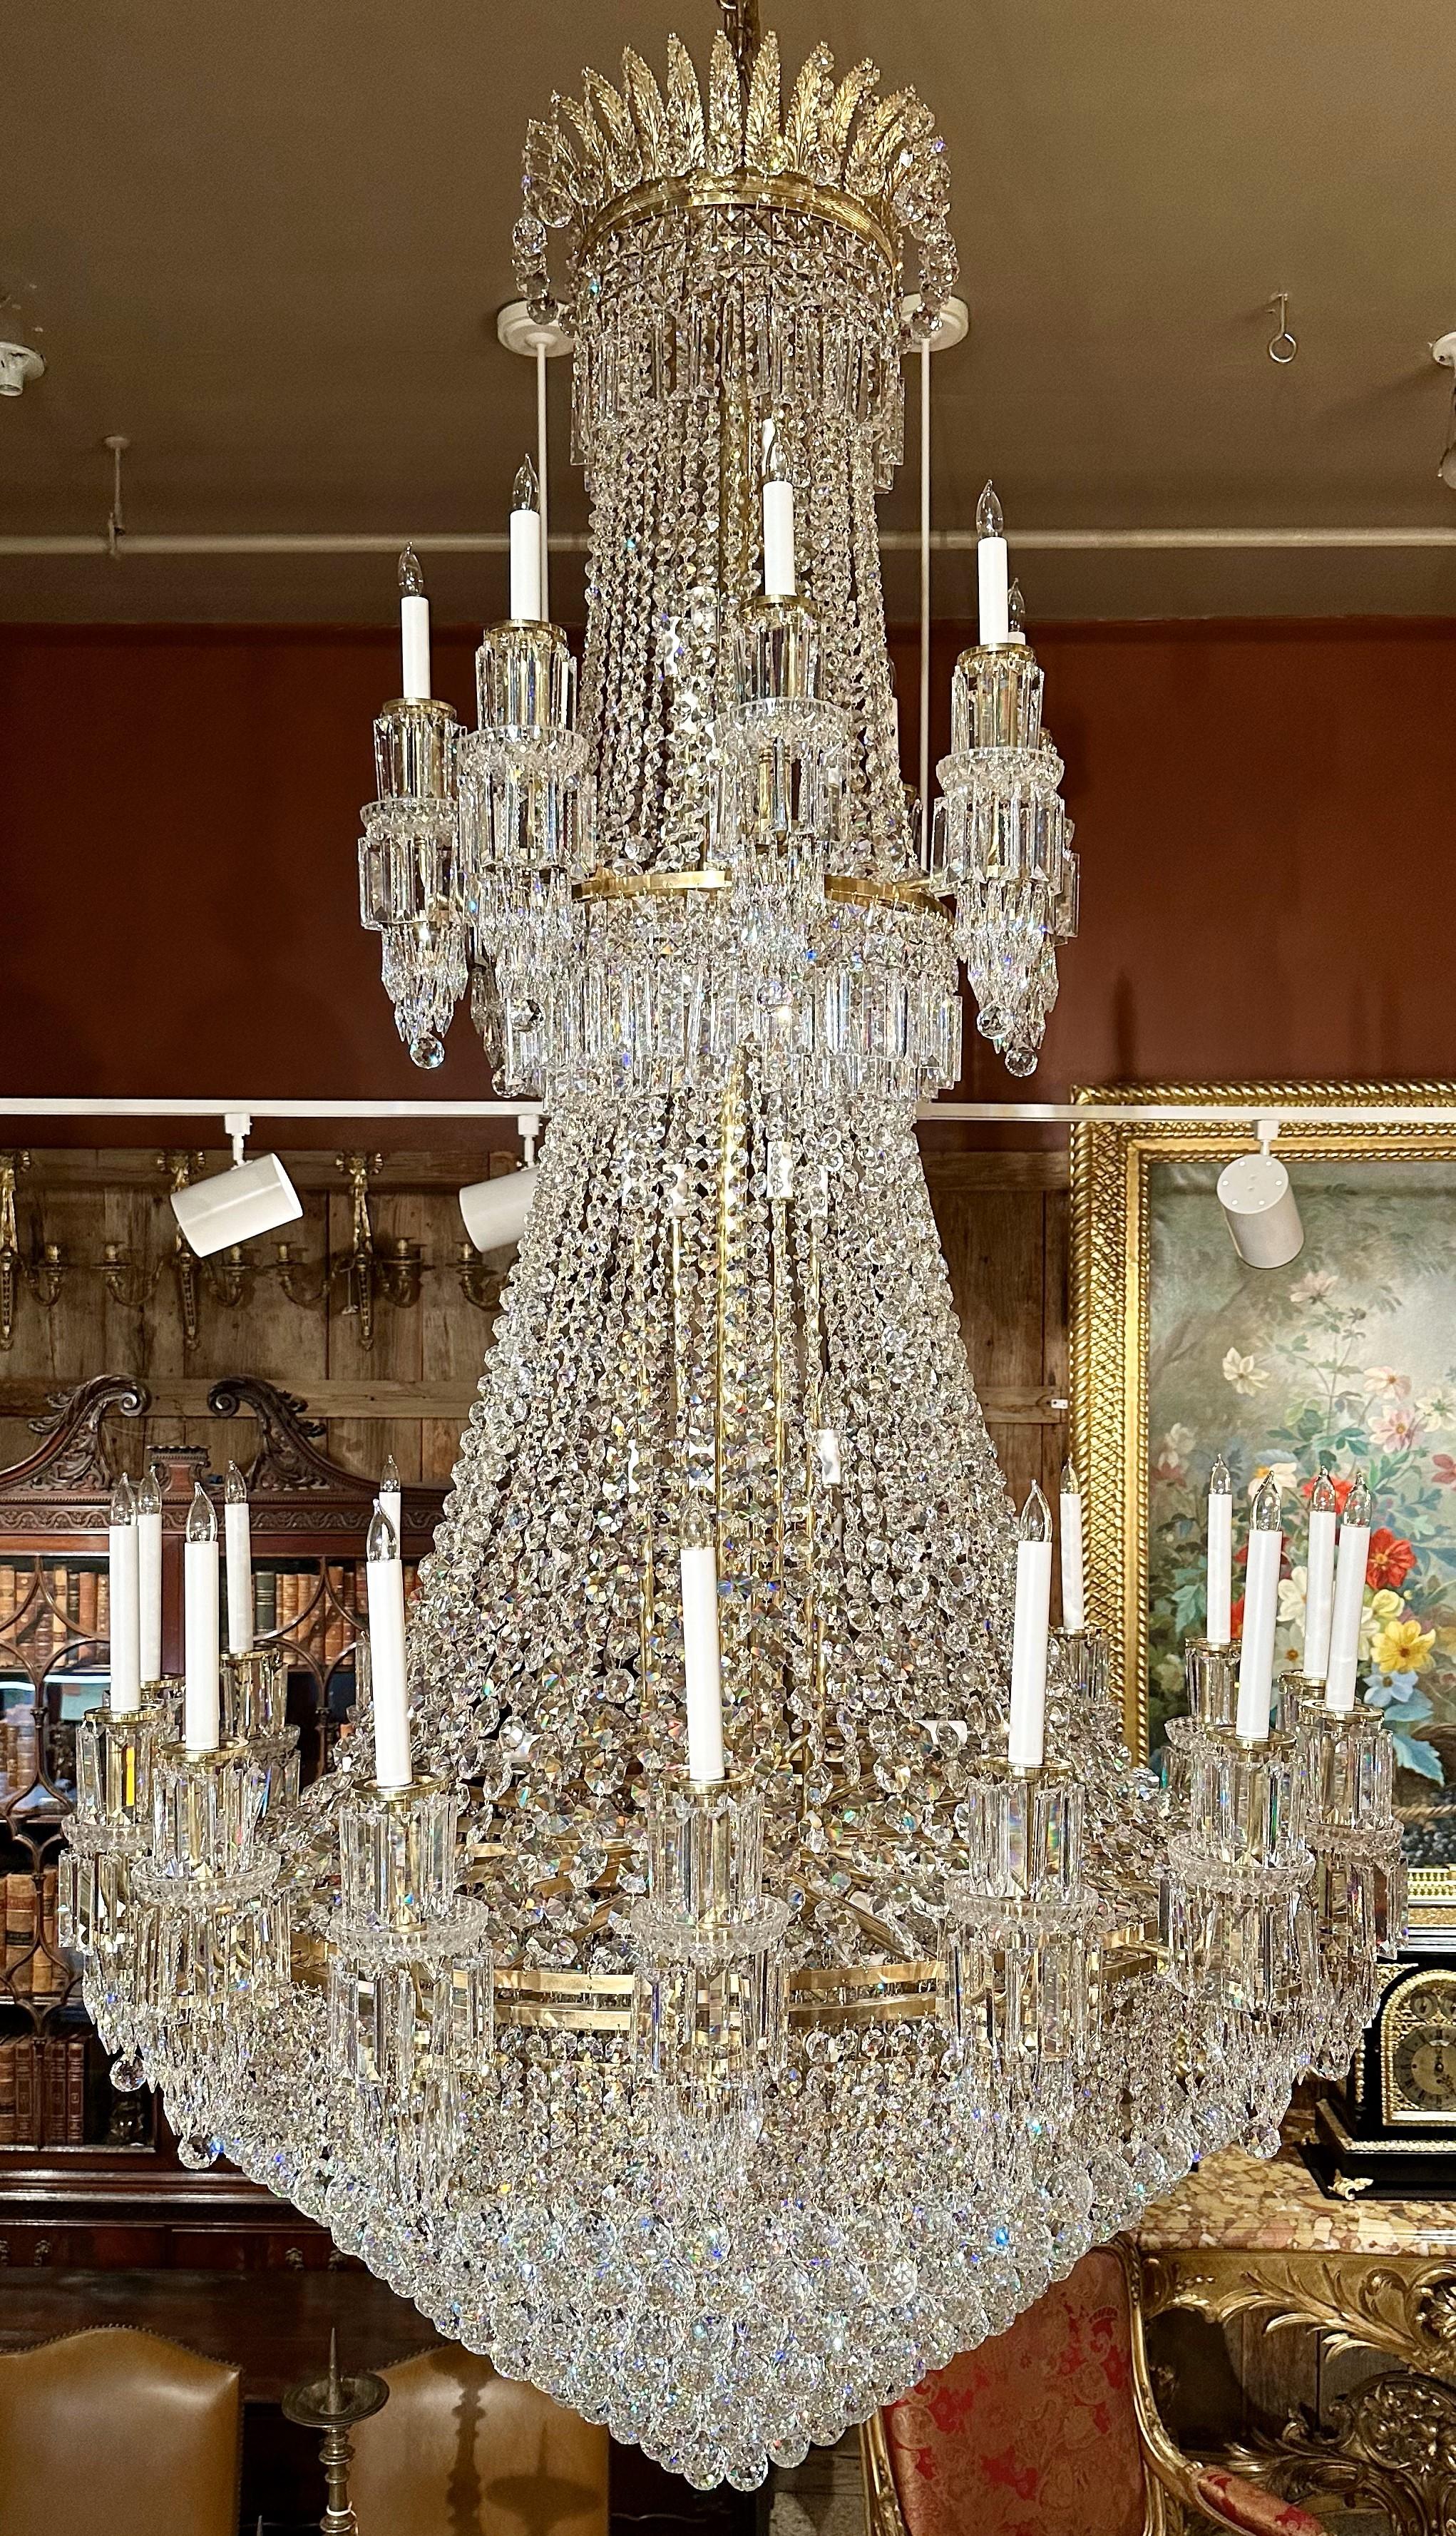 Magnificent English Cut Crystal 60 Light Chandelier.
Blanketed in fine cut crystal beading and prisms, this grand size chandelier was from the London home of the Sultan of Brunei on Bishops Avenue.